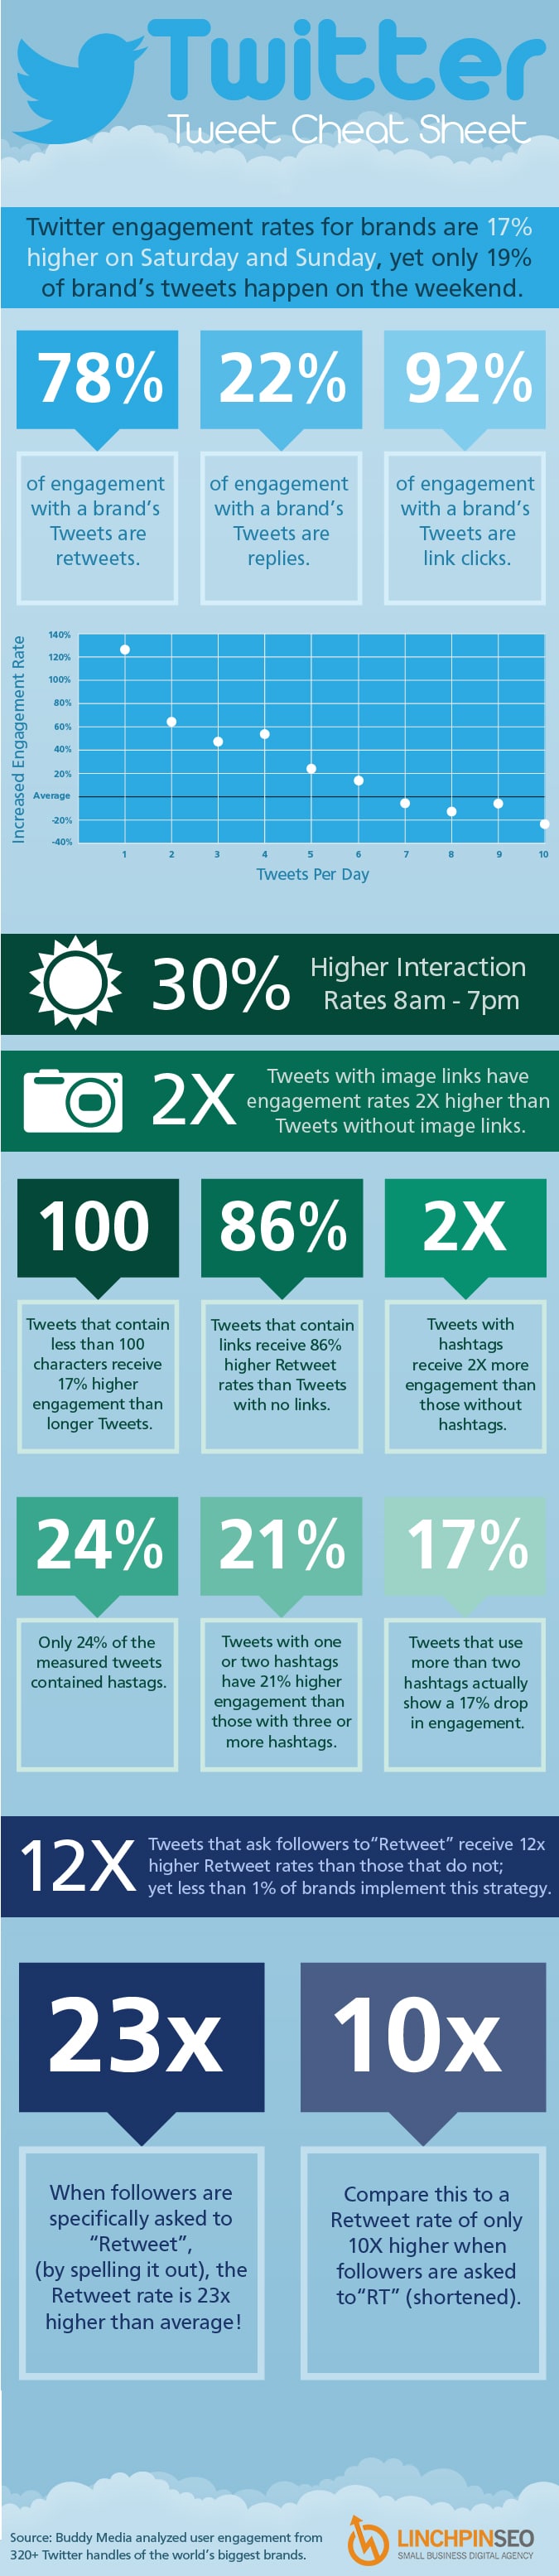 increase-twitter-engagement-rate-infographic